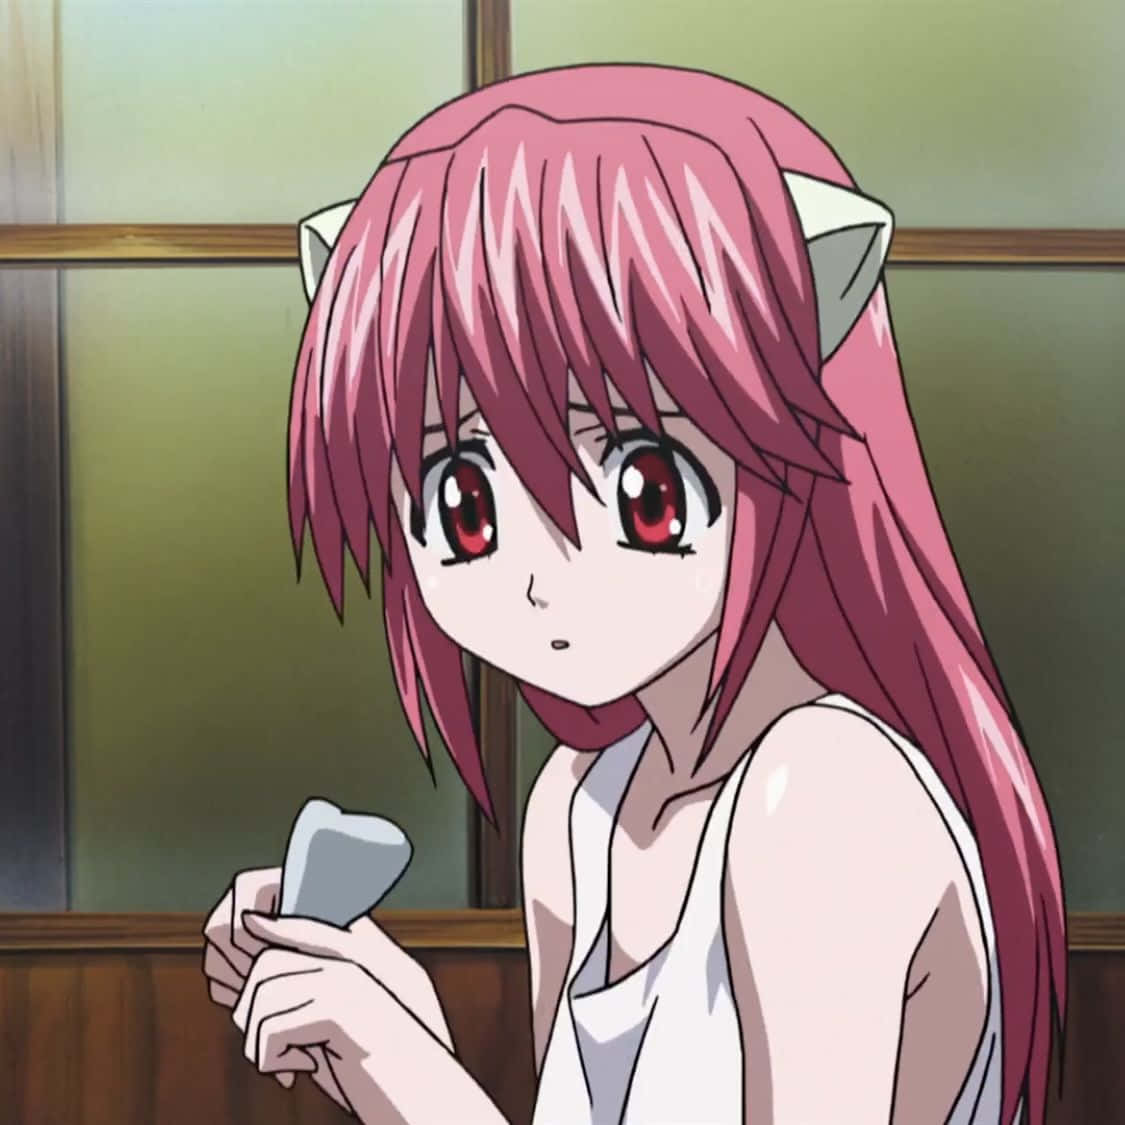 Lucy, the Diclonius, star of the anime Elfen Lied